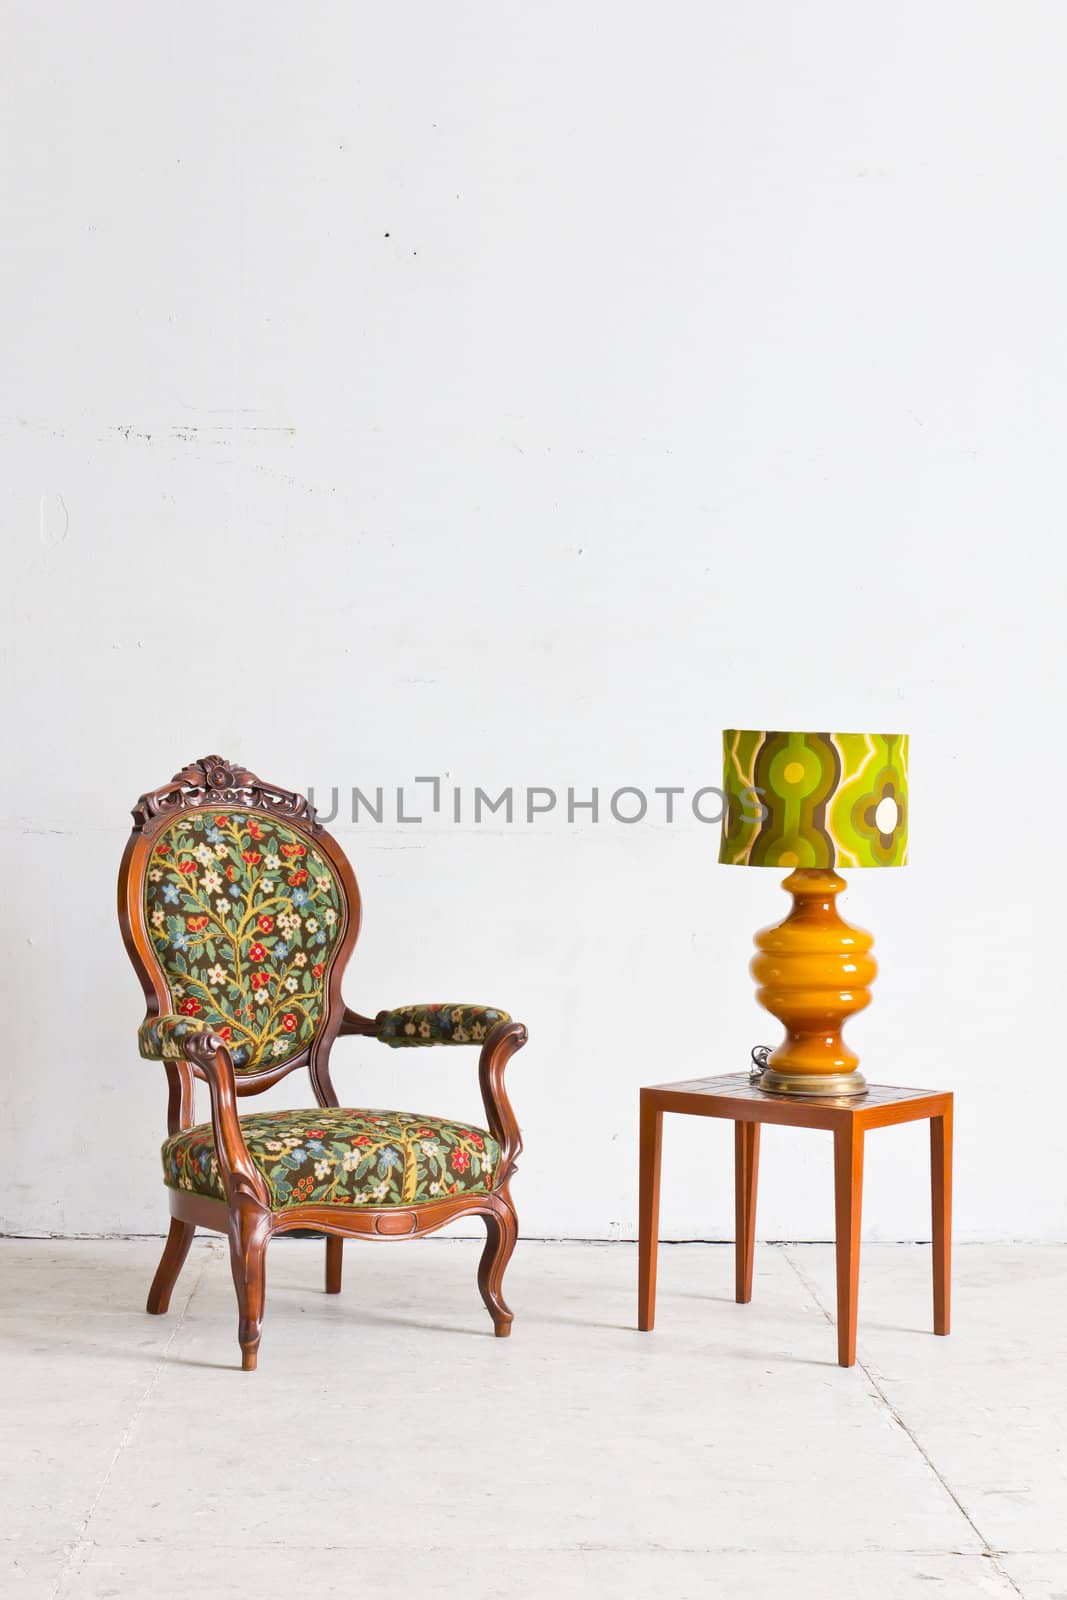 luxury armchair in white room  by tungphoto